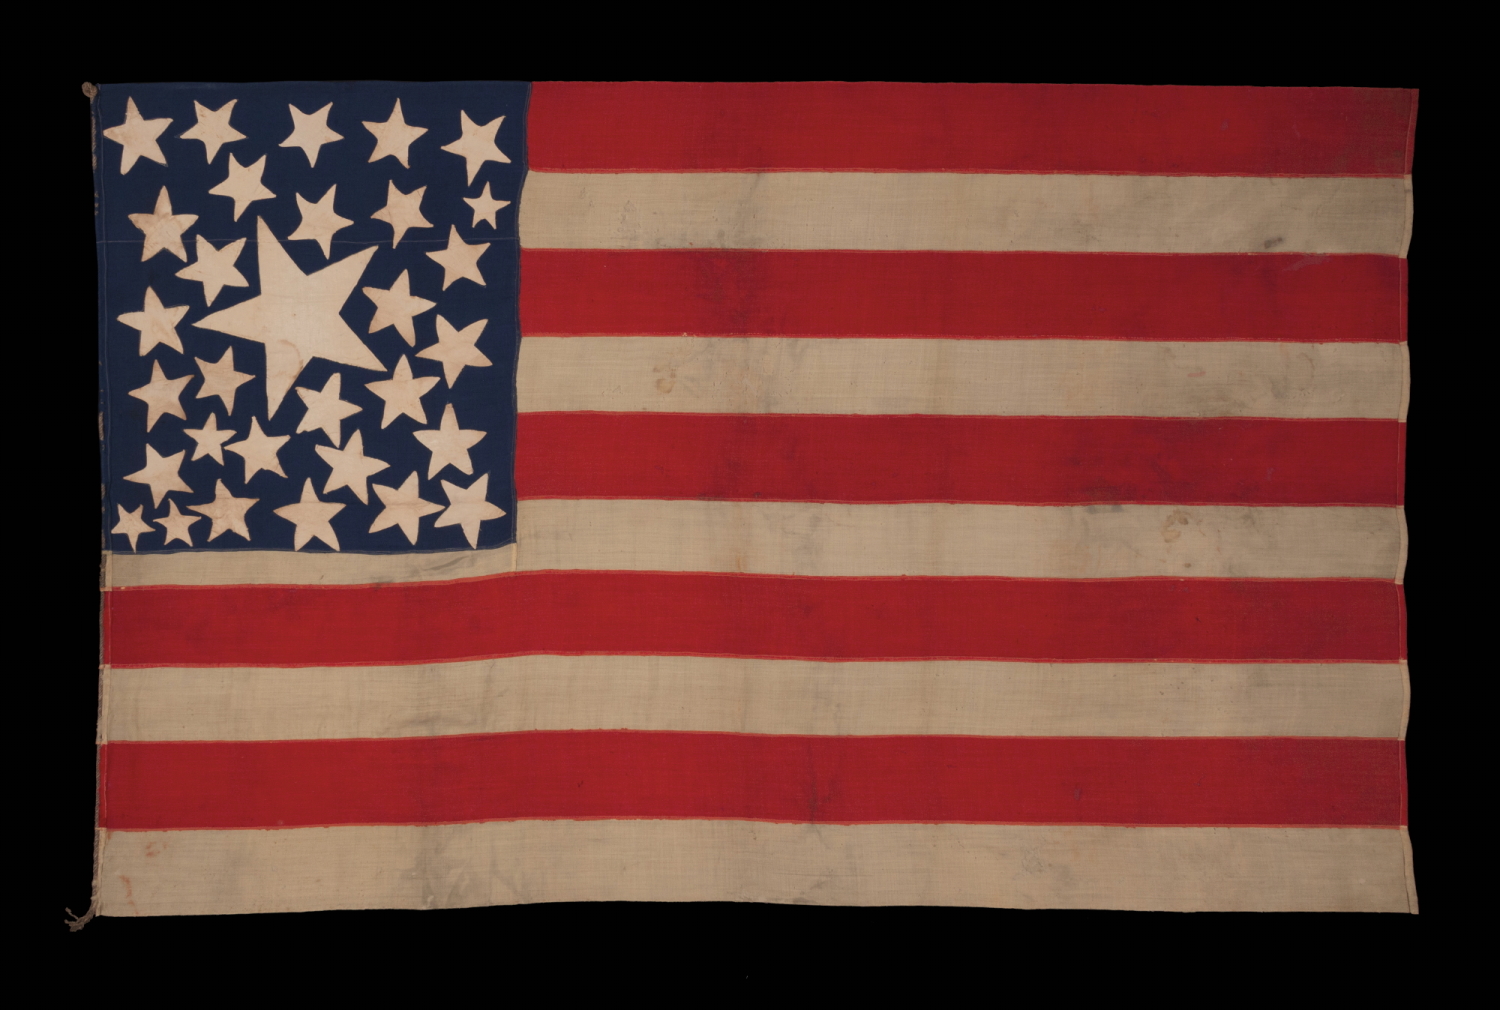 31 STARS ON AN EXTRAORDINARY ANTIQUE AMERICAN FLAG WITH A RANDOM CONSTELLATION, IN VARIOUS SHAPES AND SIZES, CLUSTERED ABOUT AN ENORMOUS CENTER STAR, WITH A COMPLEMENT OF 10 STRIPES; A MASTERPIECE OF EARLY AMERICAN FLAG-MAKING, CALIFORNIA STATEHOOD, 1850-1858